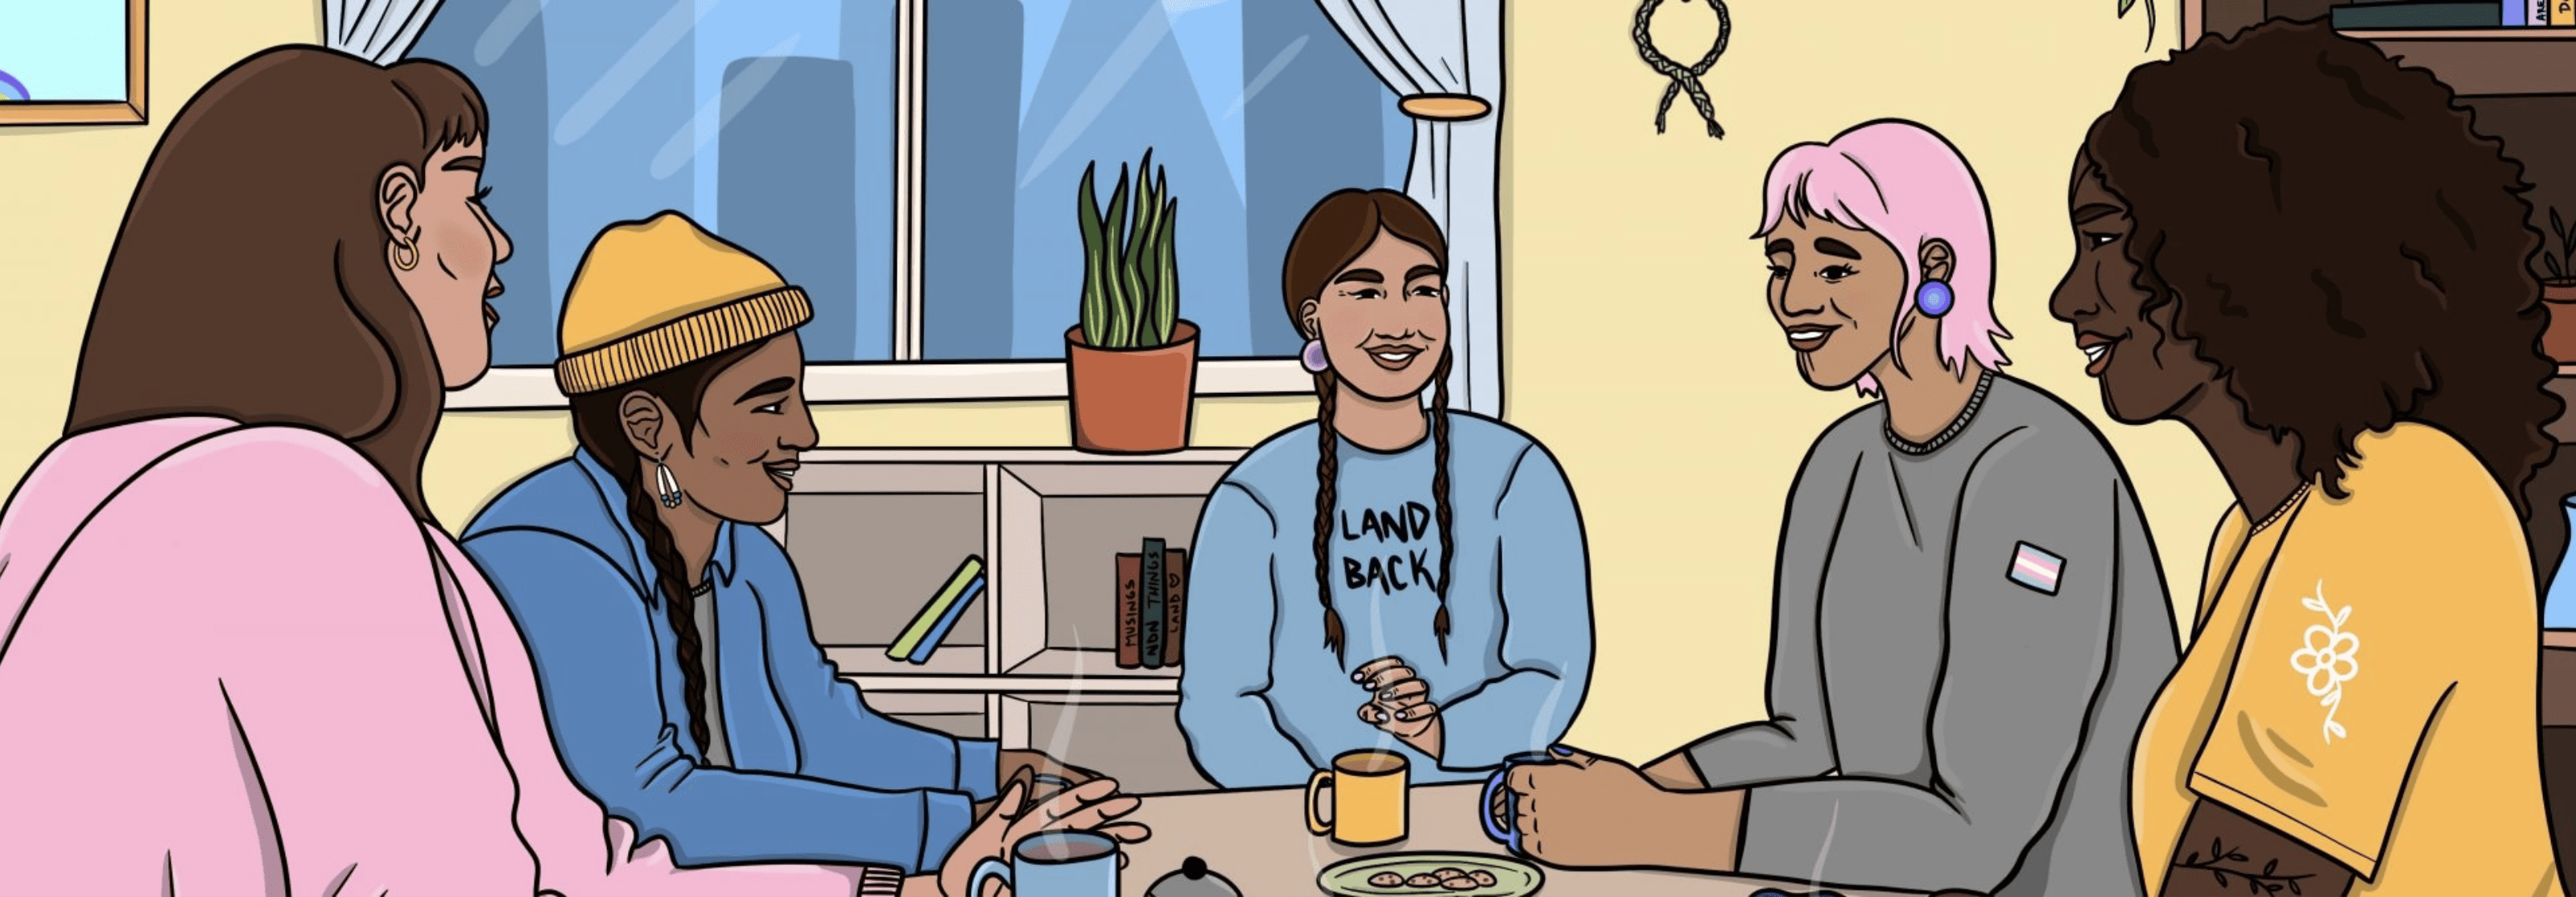 Illustration of four Indigenous youth sitting around a table eating food and drinking hot beverages